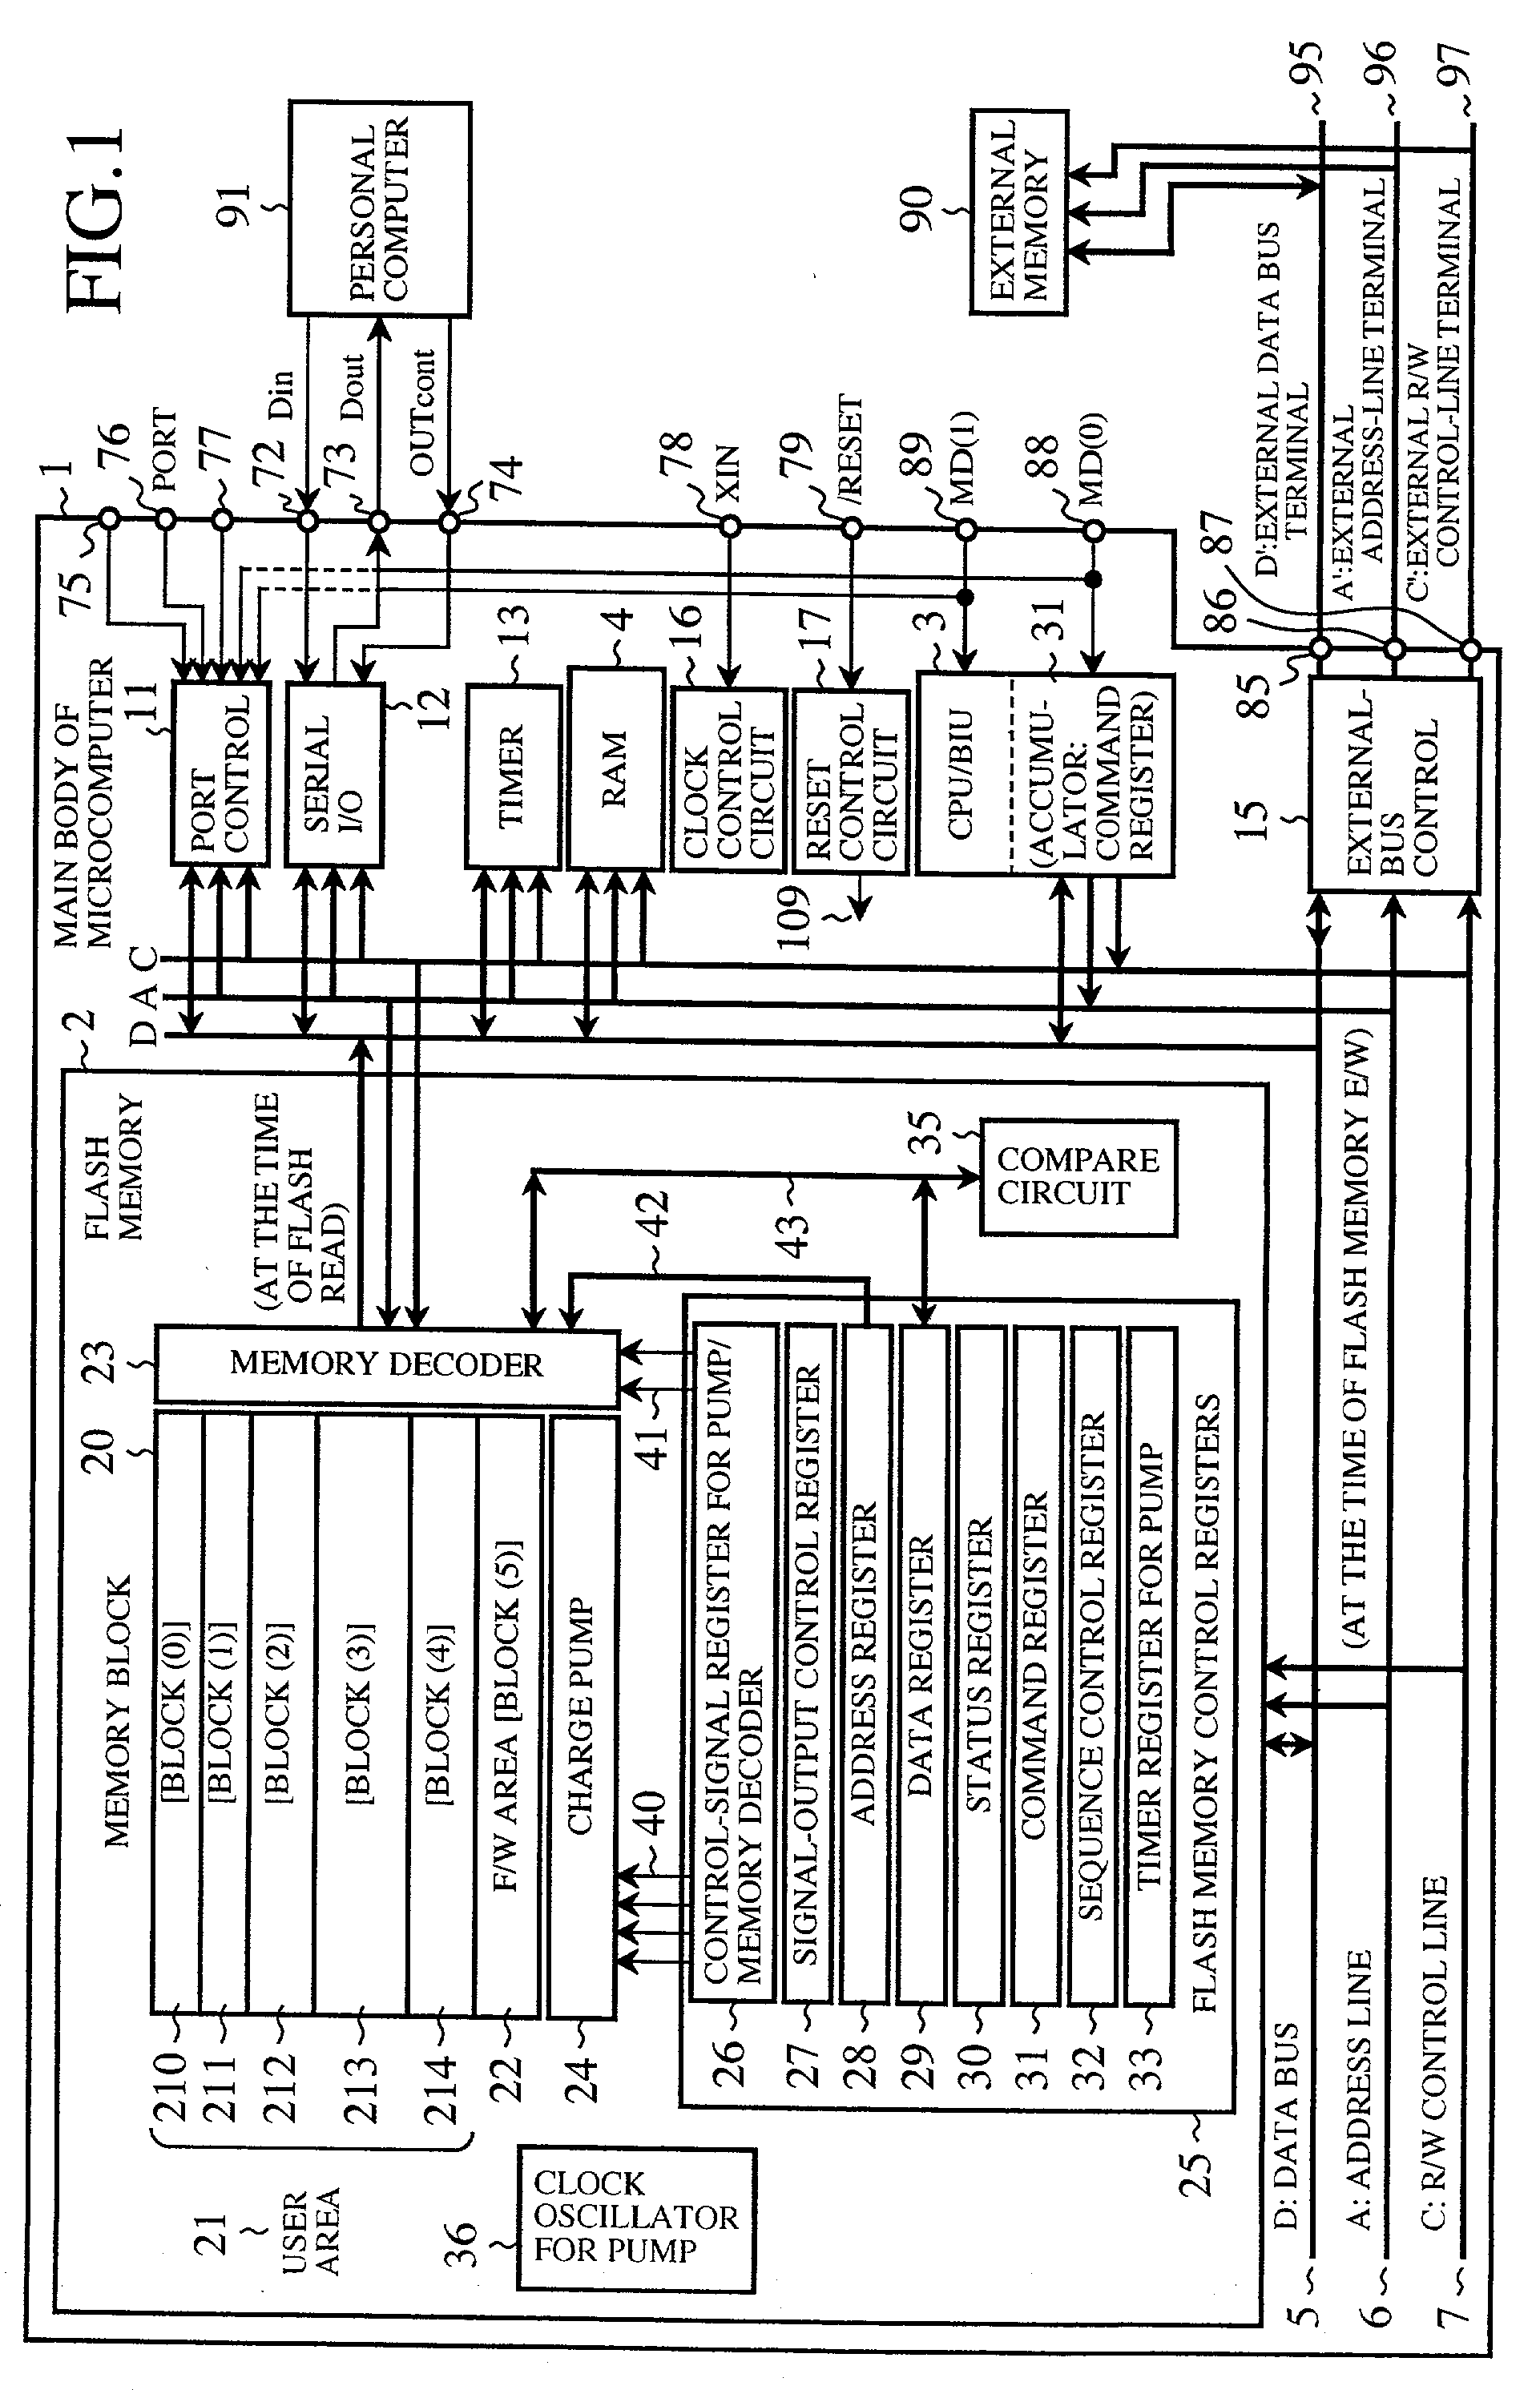 Microcomputer with built-in programmable nonvolatile memory